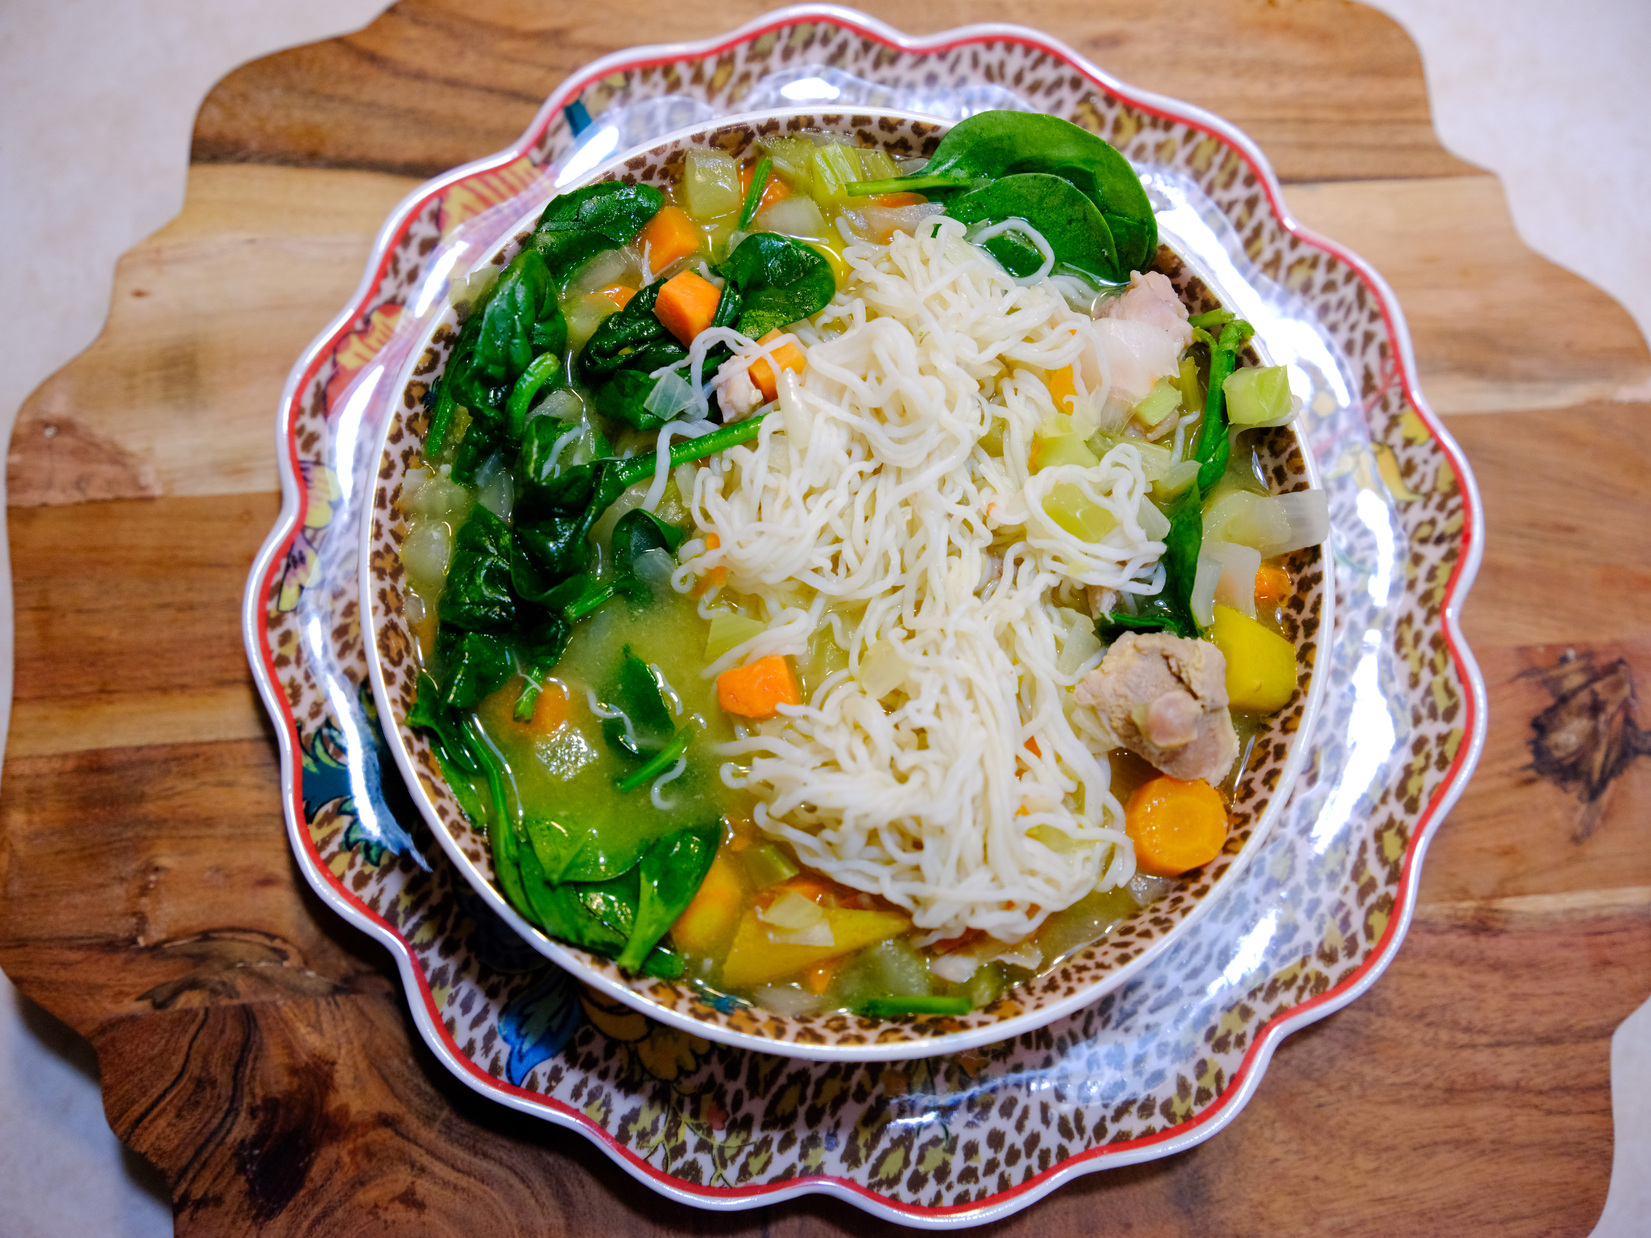 An overhead image of a large bowl of hearty, low-carb chicken noodle soup made with It's Skinny Angel Hair pasta, spinach, carrots, and more veggies in a rich broth.